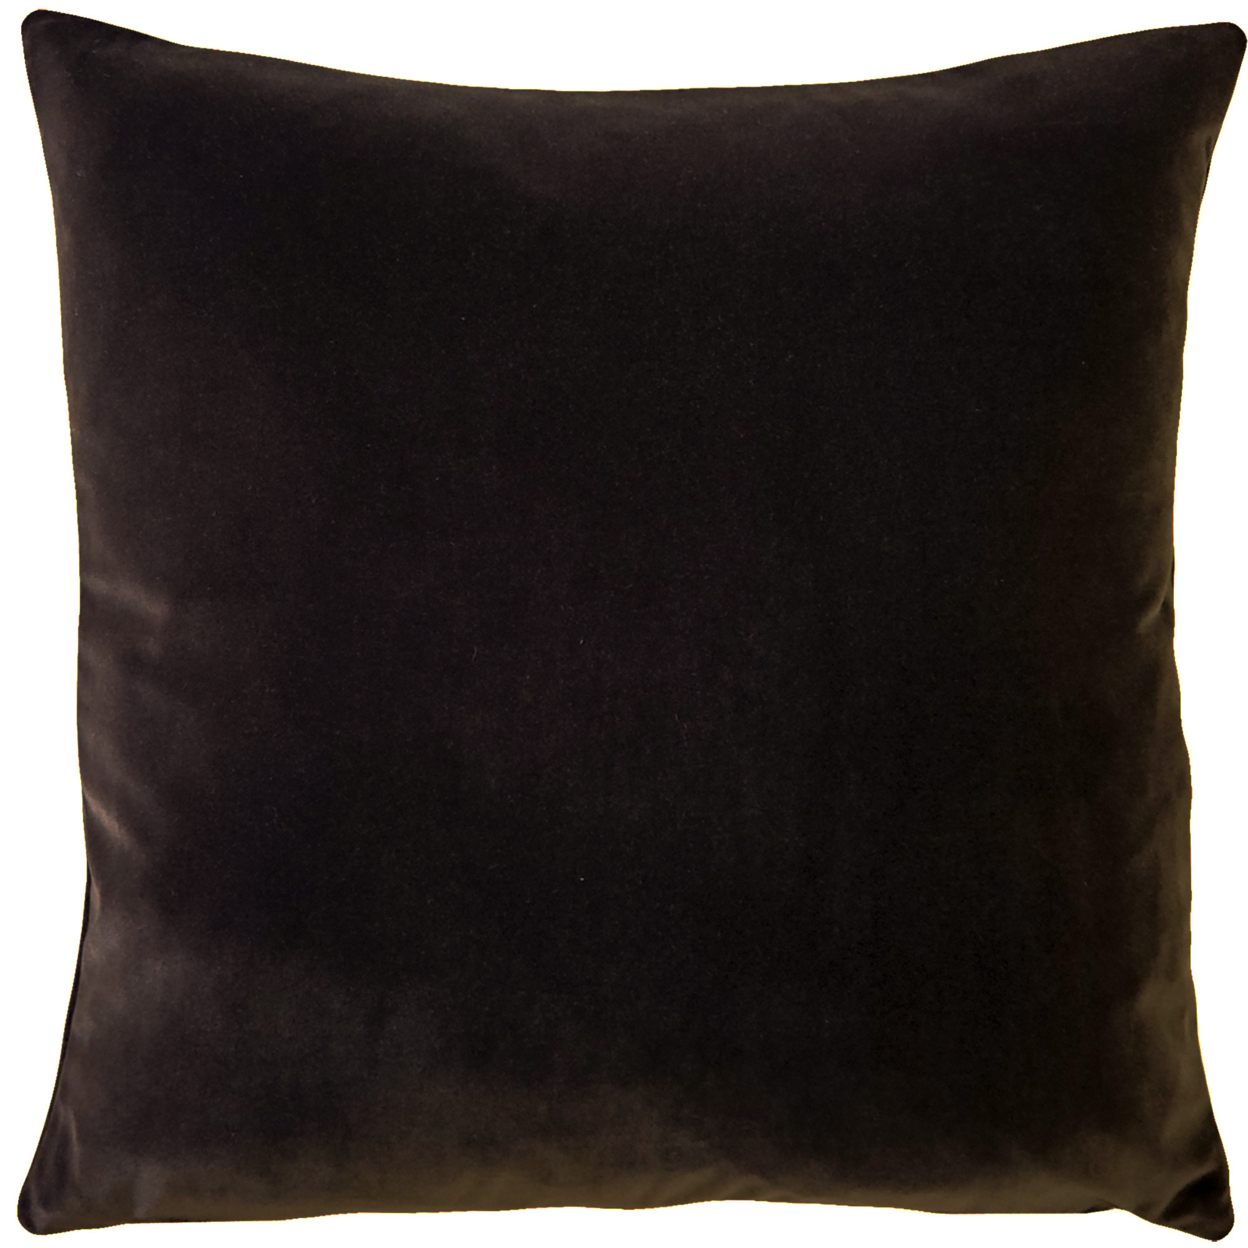 Castello Velvet Throw Pillows, Complete Pillow with Polyfill Pillow Insert (18 Colors, 3 Sizes) - espresso brown, 20x20